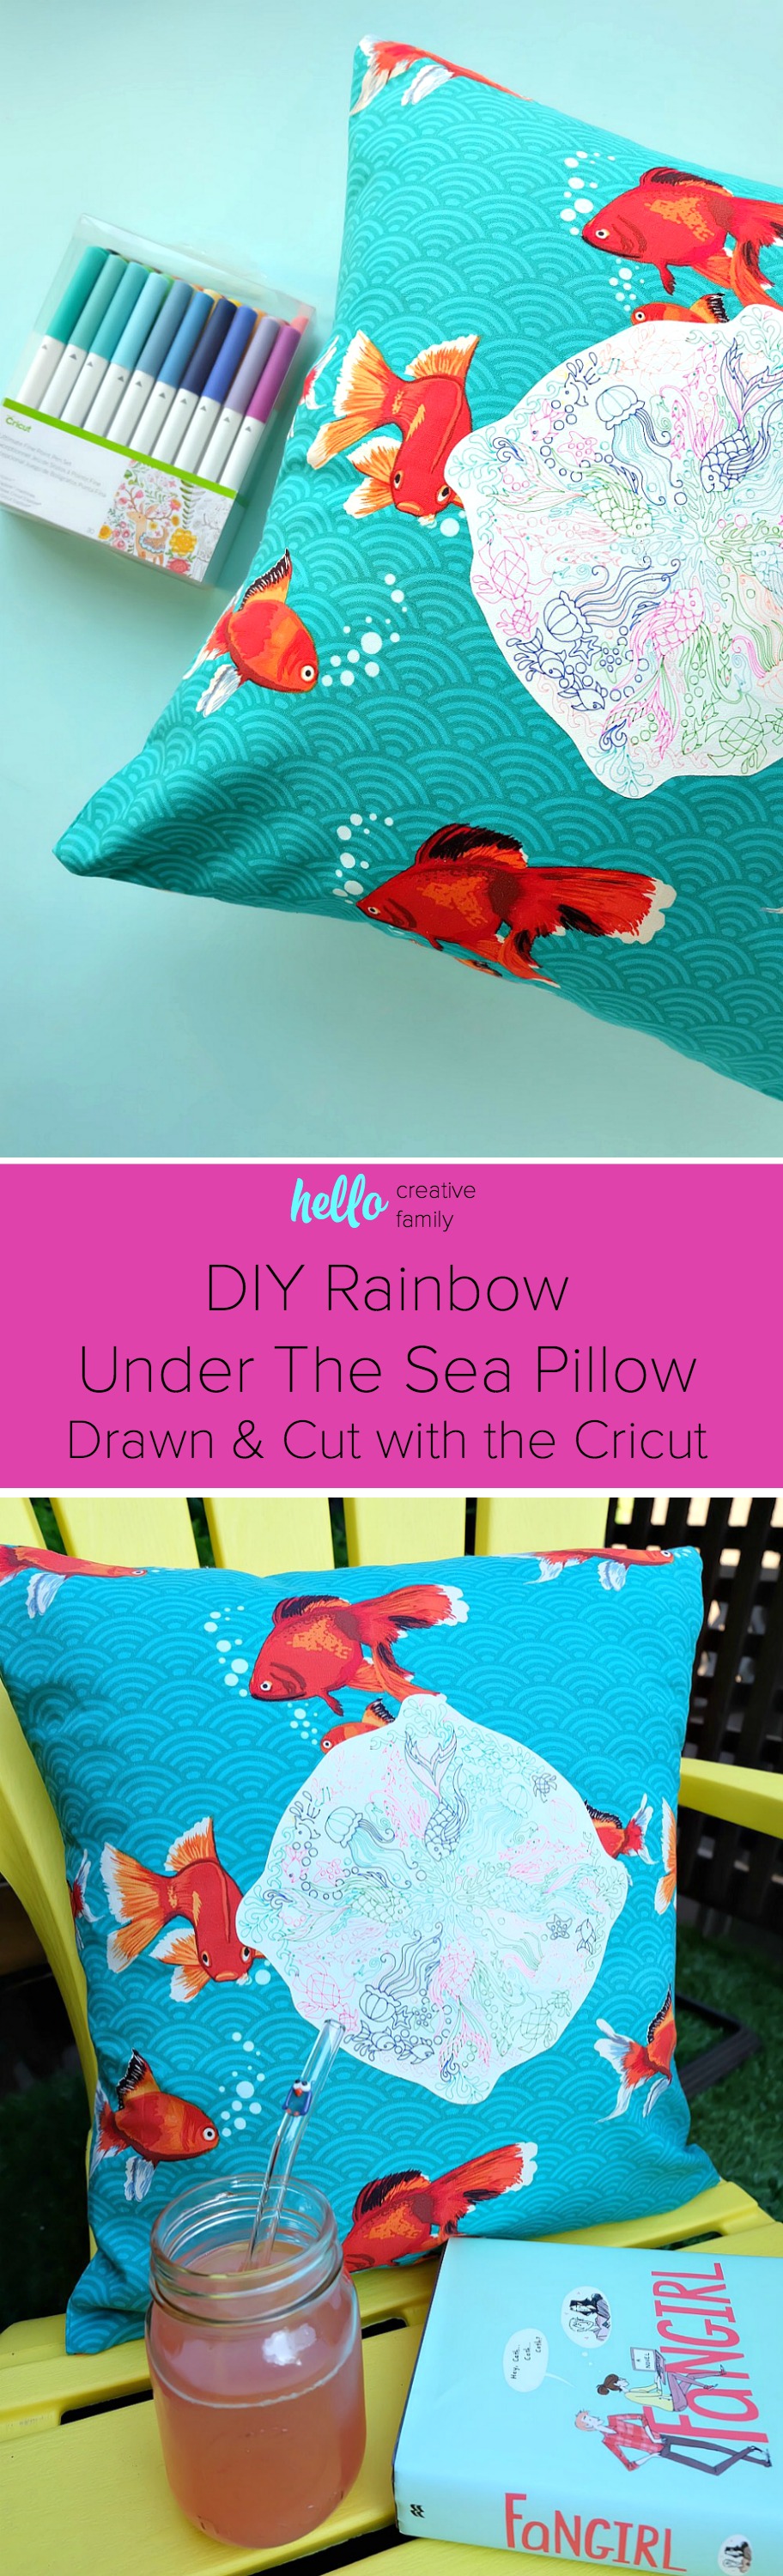 Create a gorgeous DIY Rainbow Under the Sea Pillow using your Cricut Explore to draw a coloring page design on printable heat transfer vinyl! This is an easy project that makes bright and colorful handmade gift idea. Includes instructions on how to sew an envelope style throw pillow cover. #CricutMade